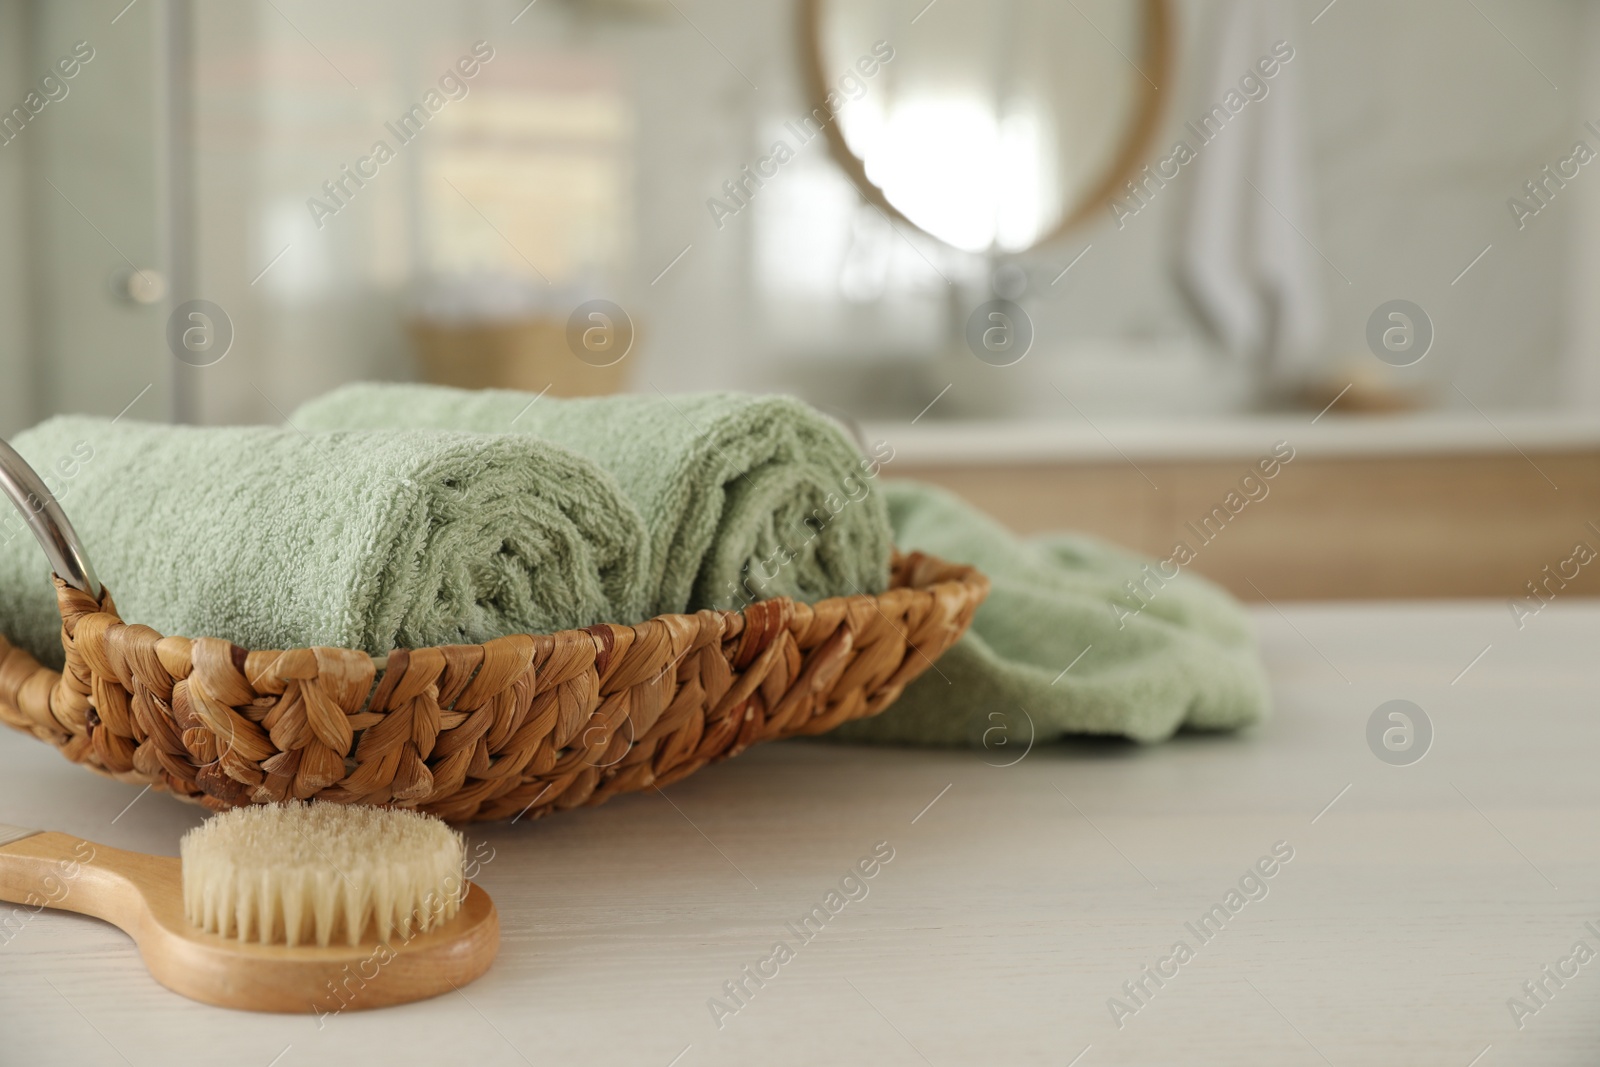 Photo of Wicker basket with rolled towels and massage brush on white wooden table in bathroom